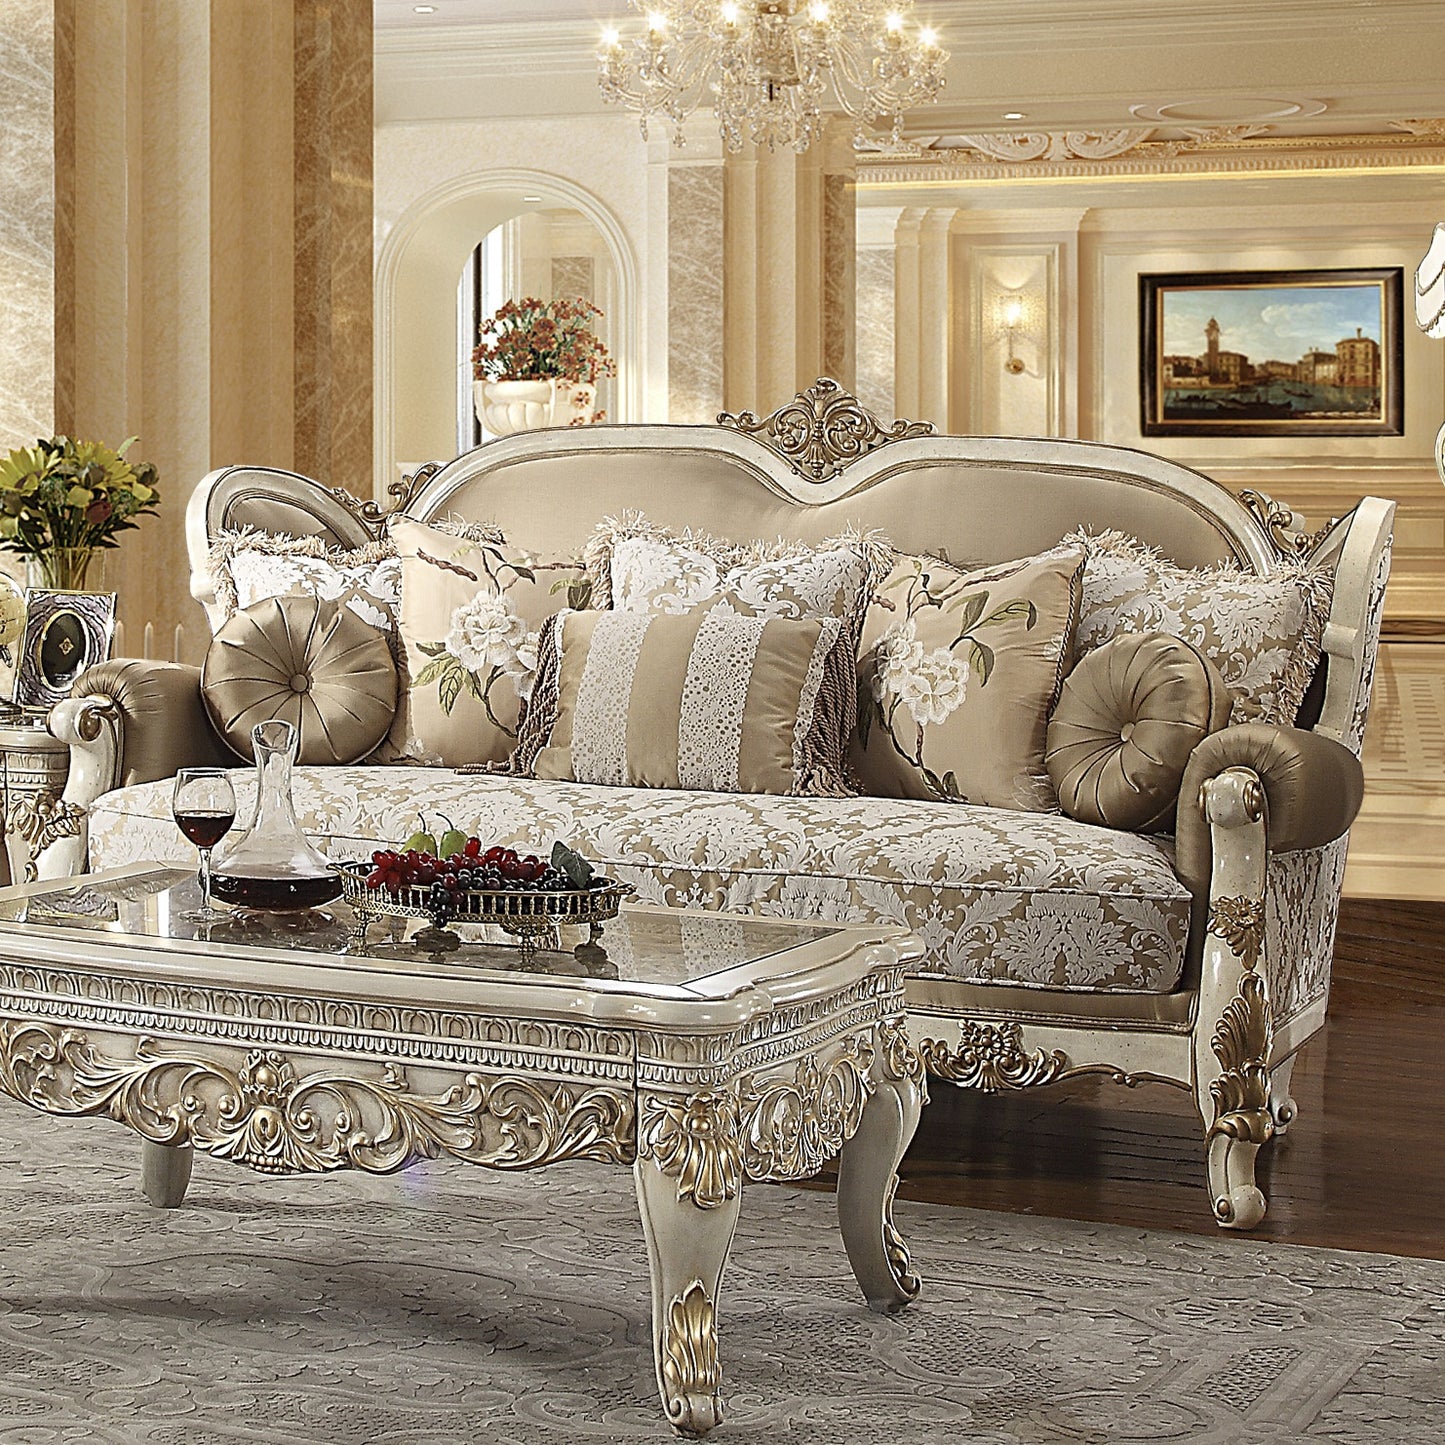 Fabric Sofa in Vintage White Finish S2652 European Traditional Victorian